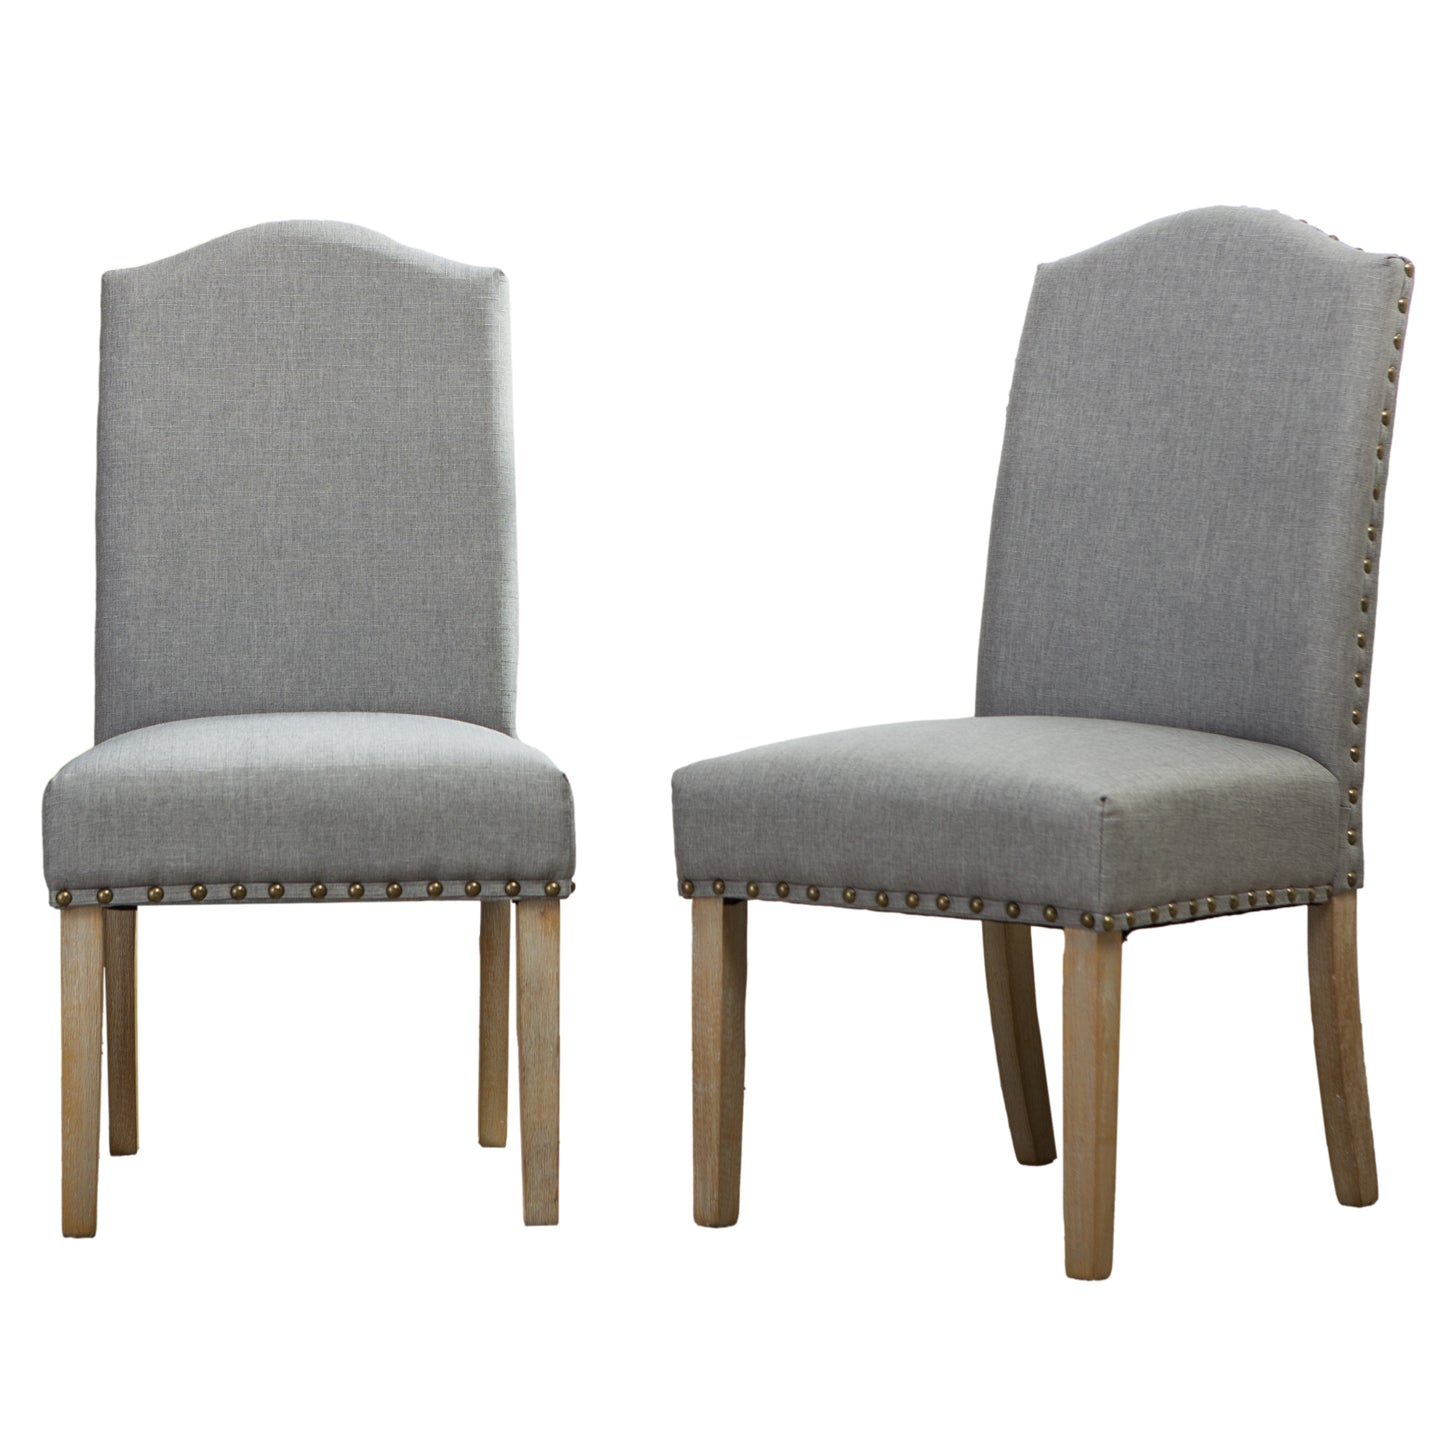 Mod Urban Style Solid Wood Nailhead Grey Fabric Padded Parson Chair, Set of 2